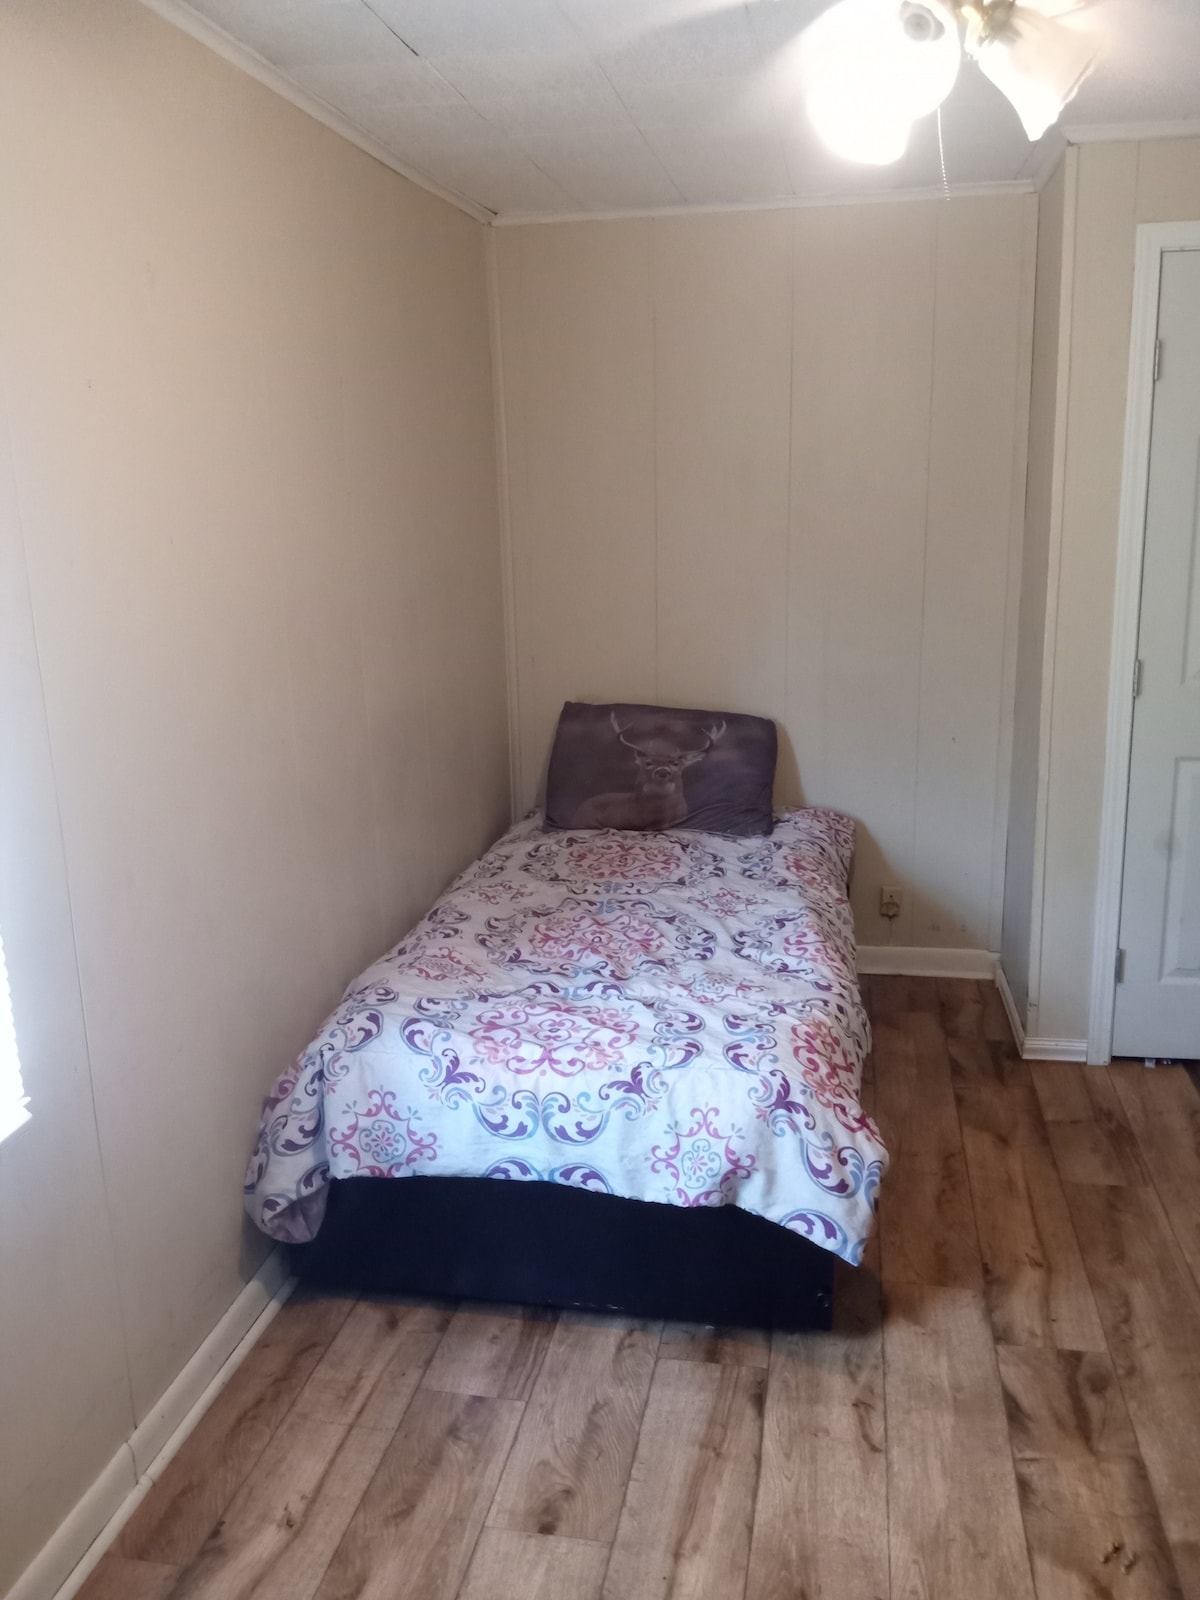 1 bedroom shared home